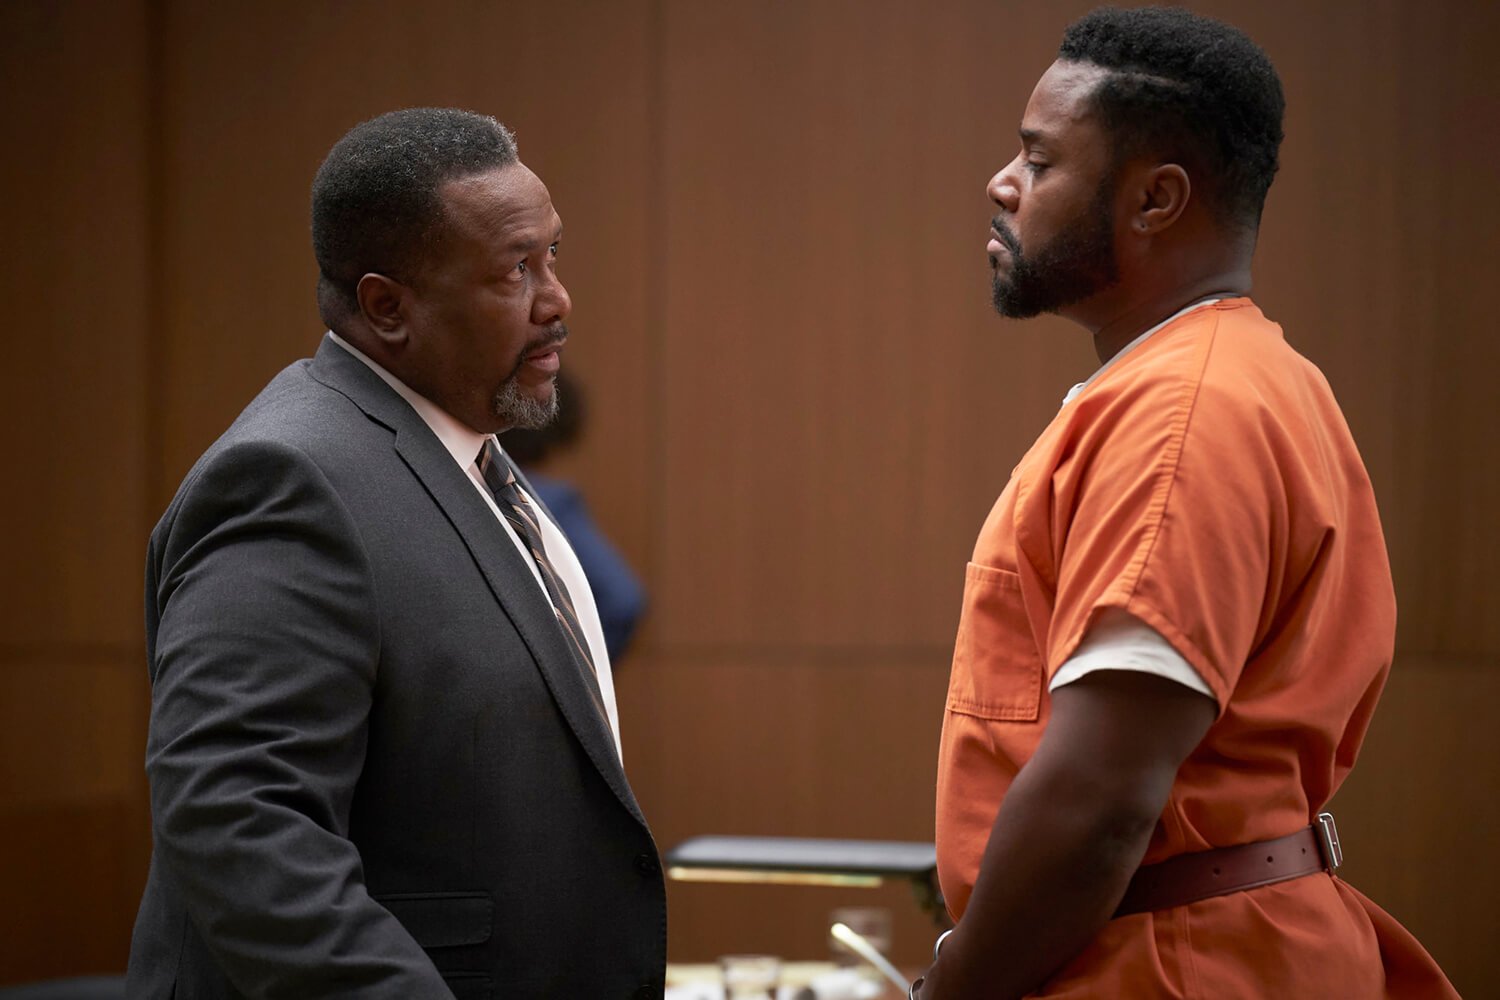 Accused Episode 4 cast members Wendell Pierce as Detective Trent Douglas and Malcolm-Jamal Warner as Kendall facing each other in a courtroom.